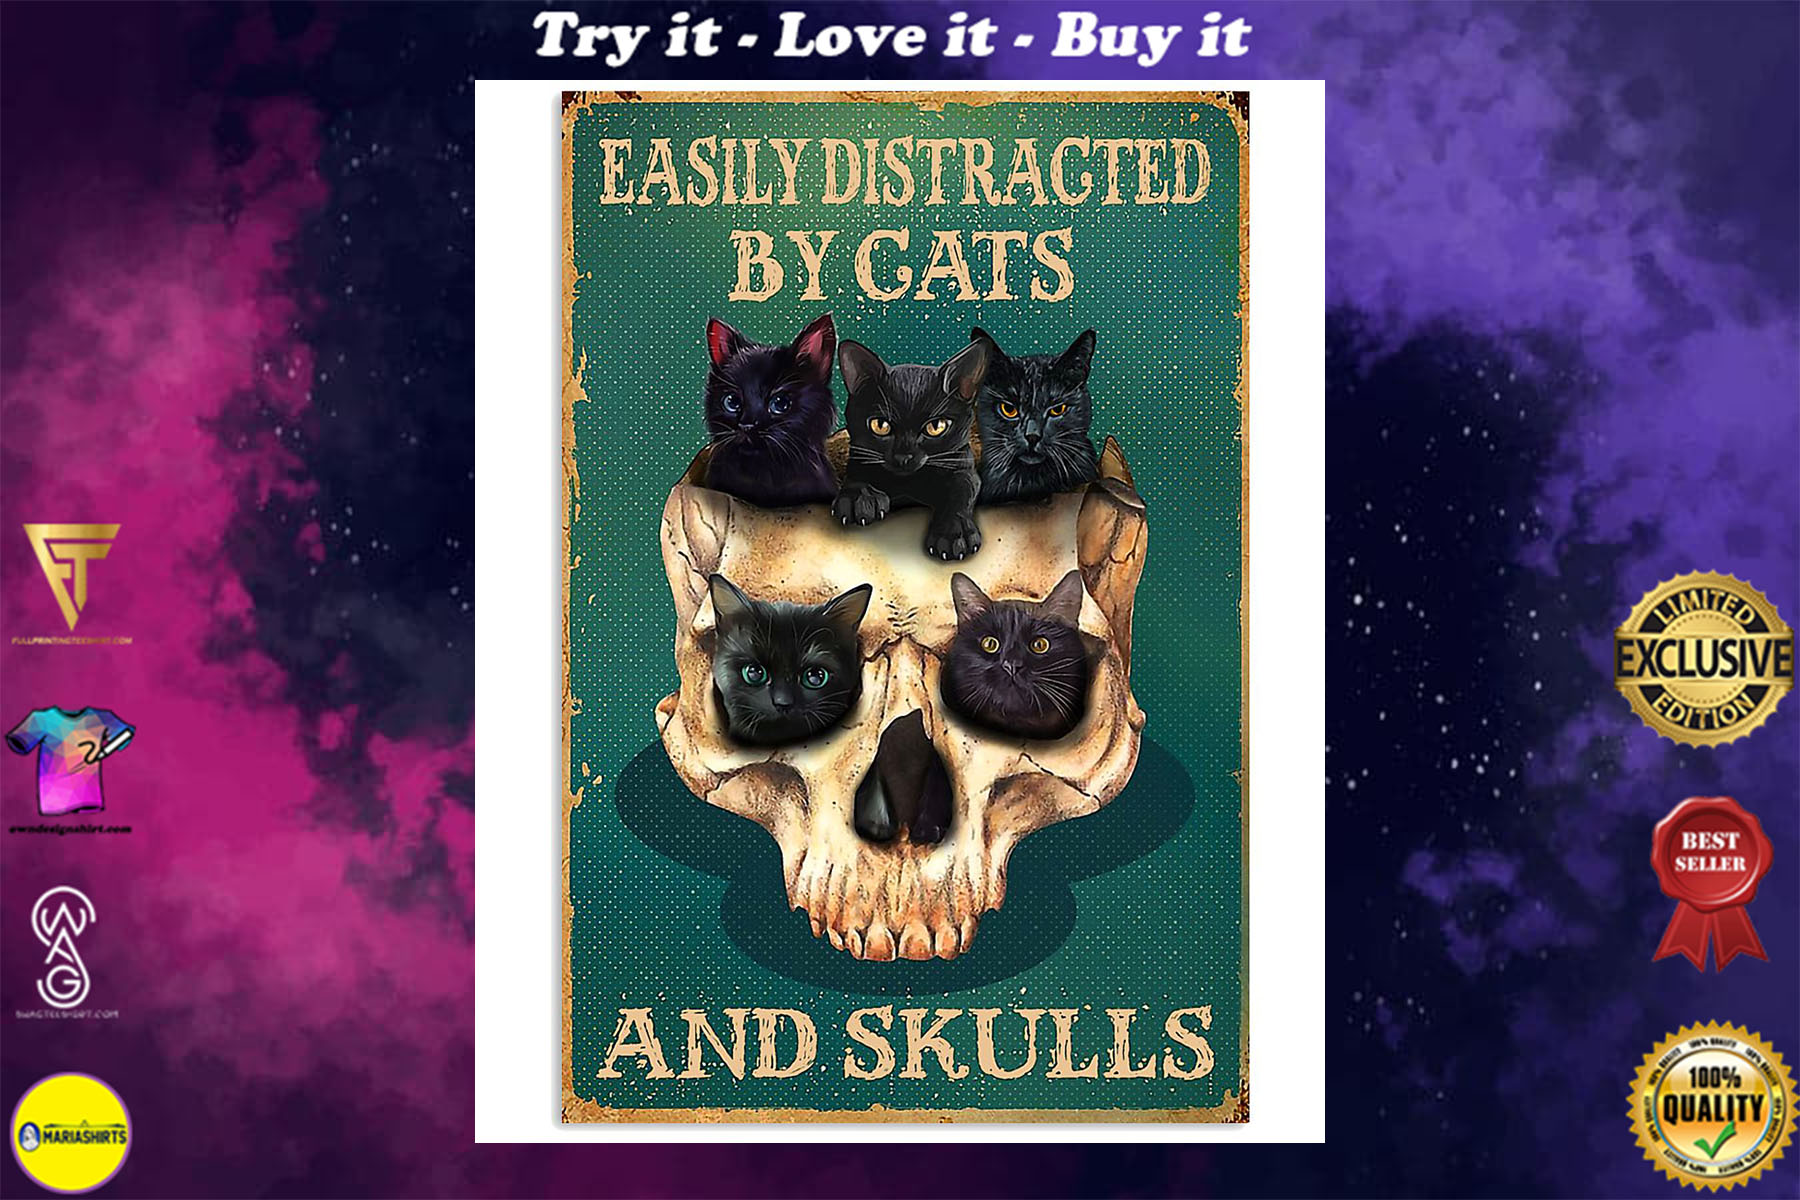 halloween easily distracted by cats and skulls retro poster